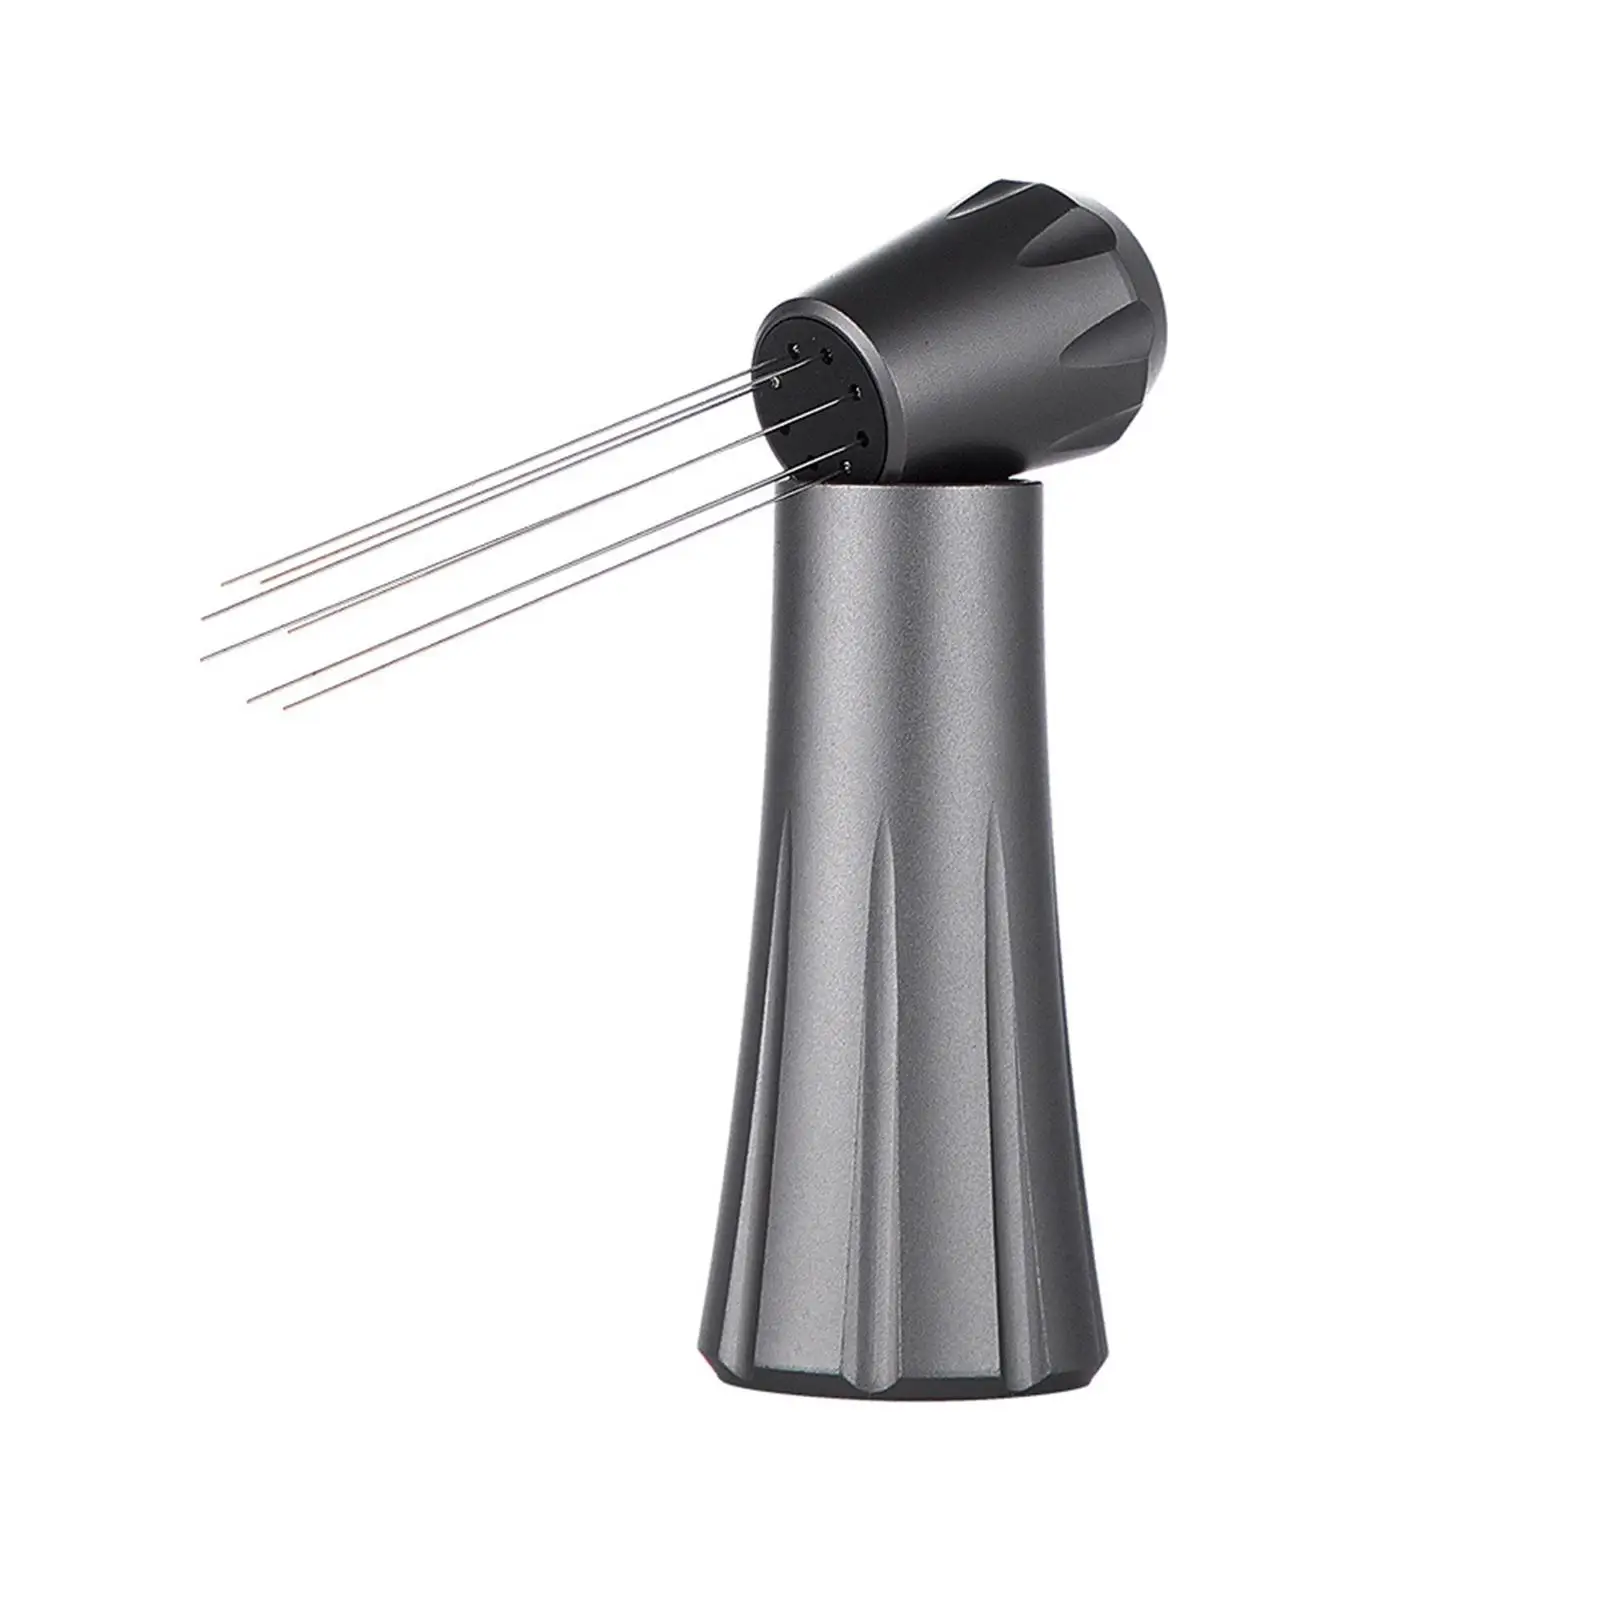 Coffee Stirring Tamper, Espresso Tools, 0.4mm Coffee Stirrer with Stand for Office, Cafe, Home